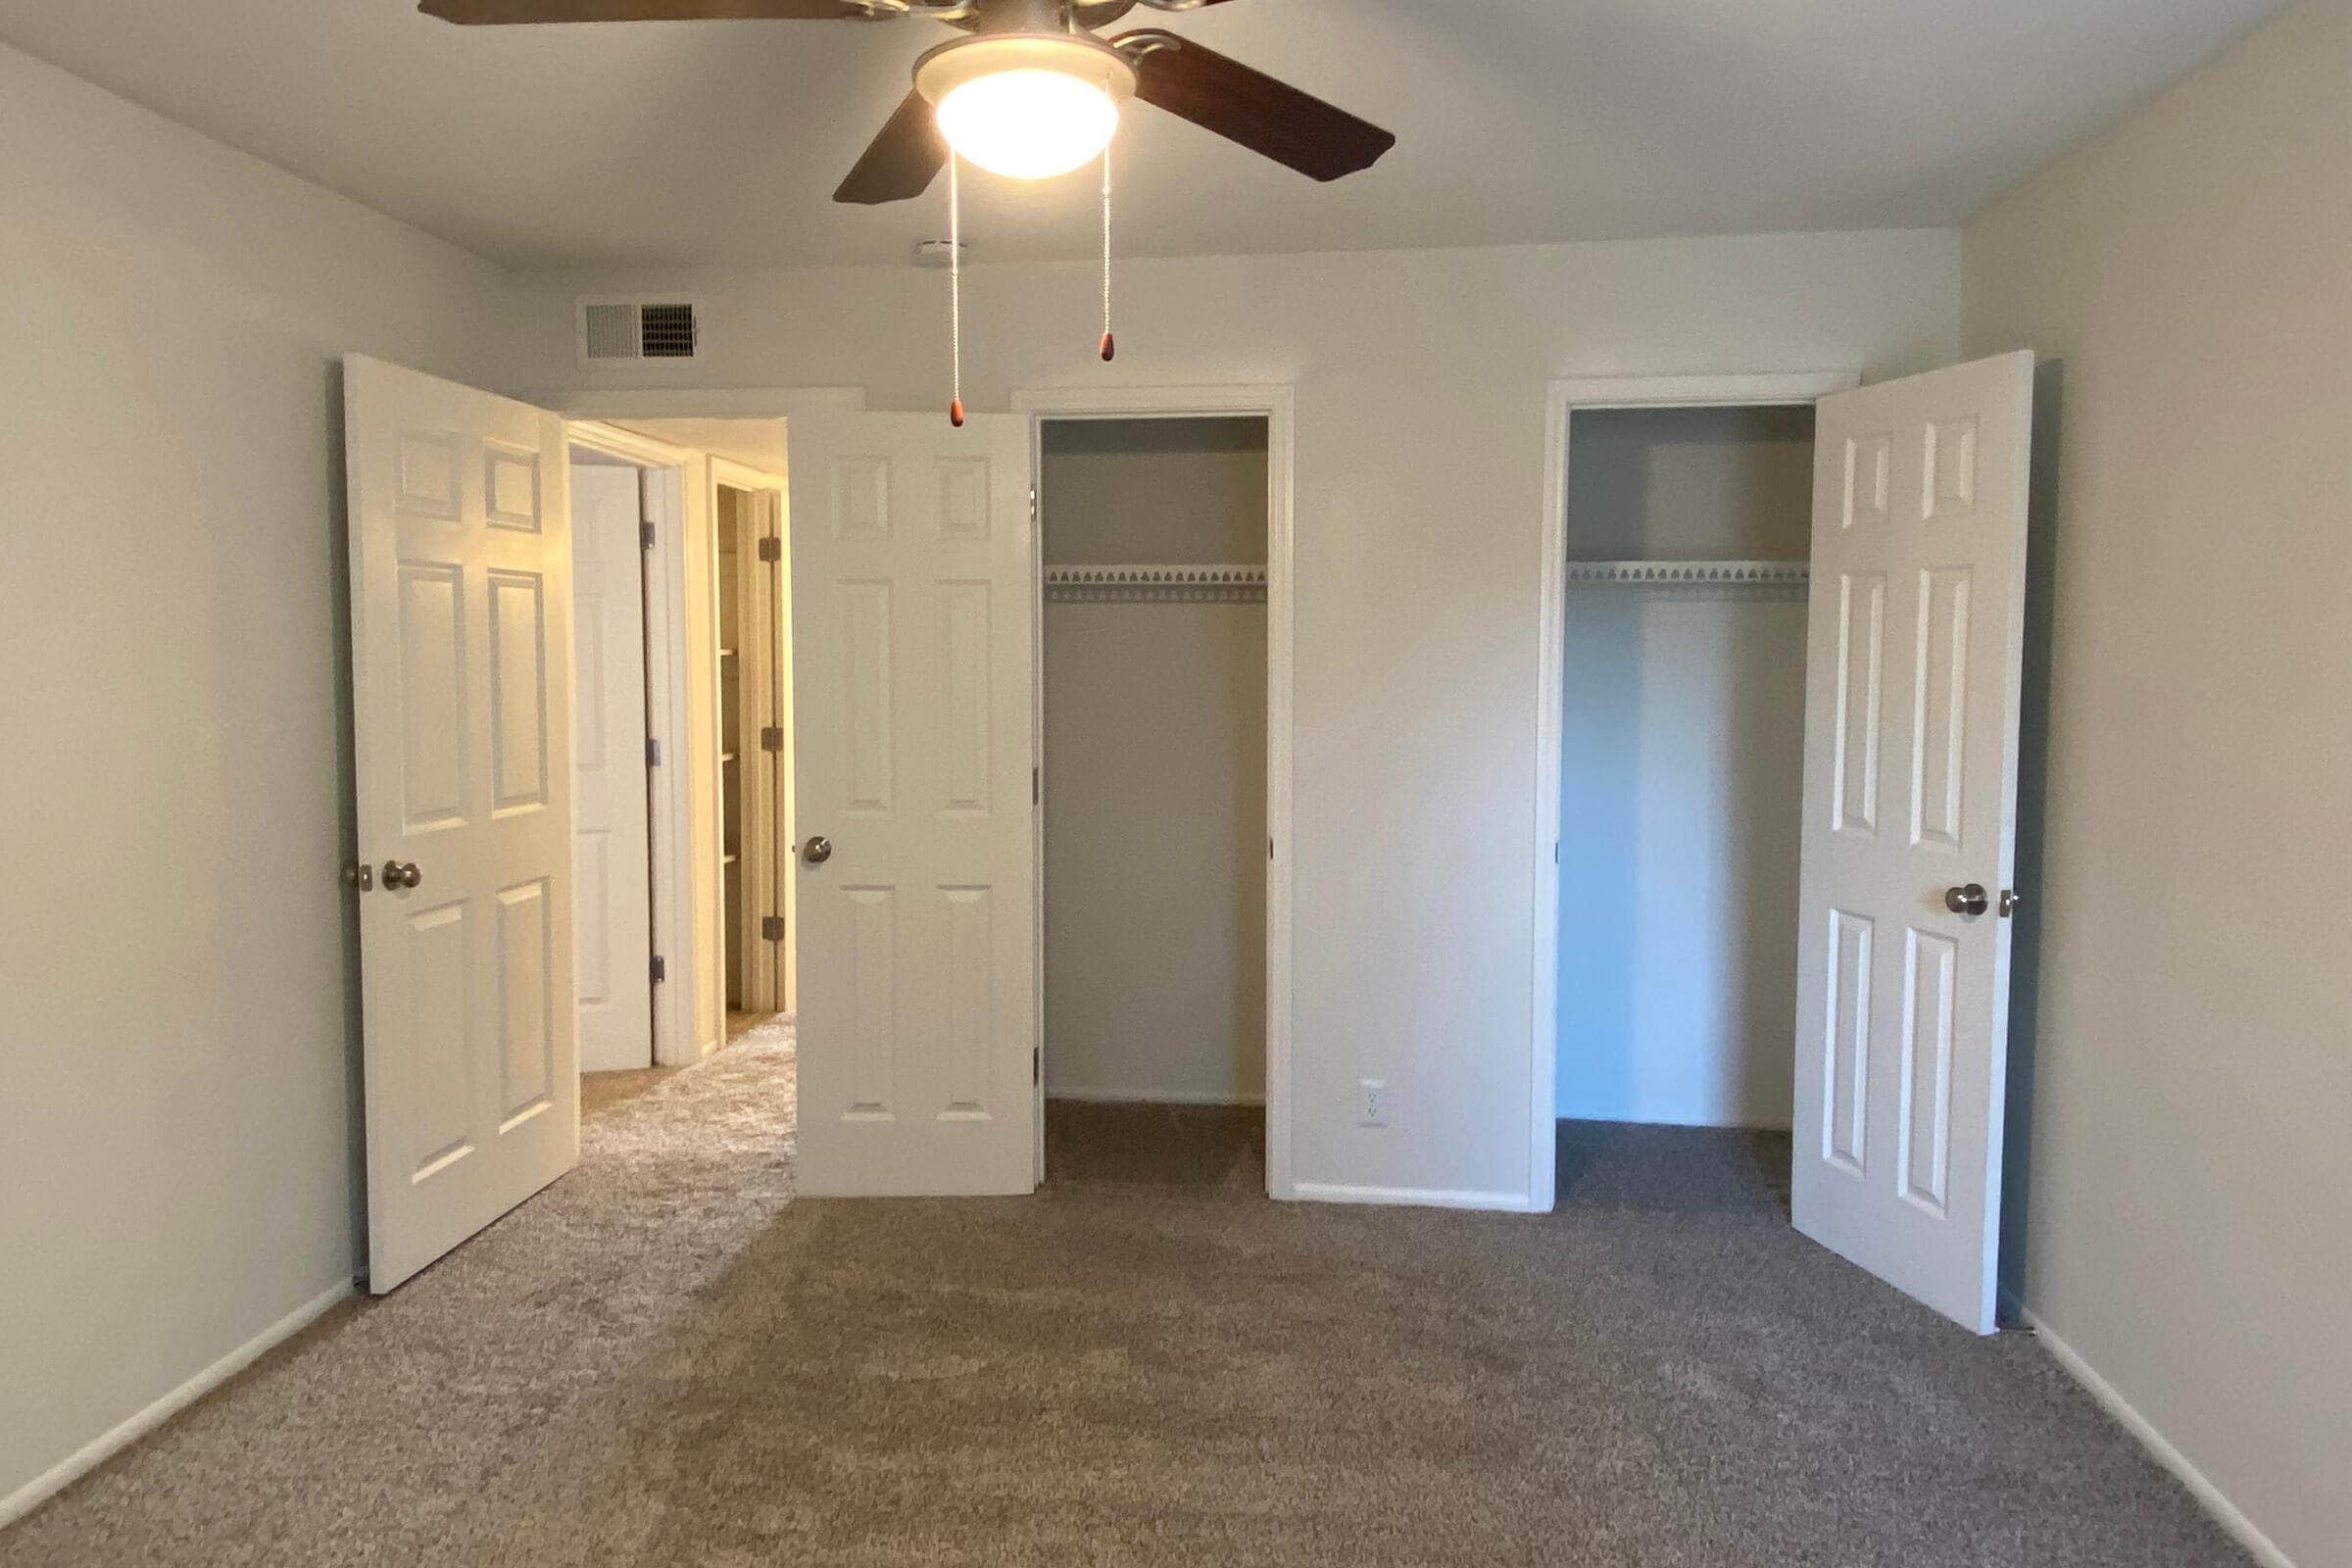 2, 3, AND 4 BEDROOM APARTMENTS IN HOUSTON, TX